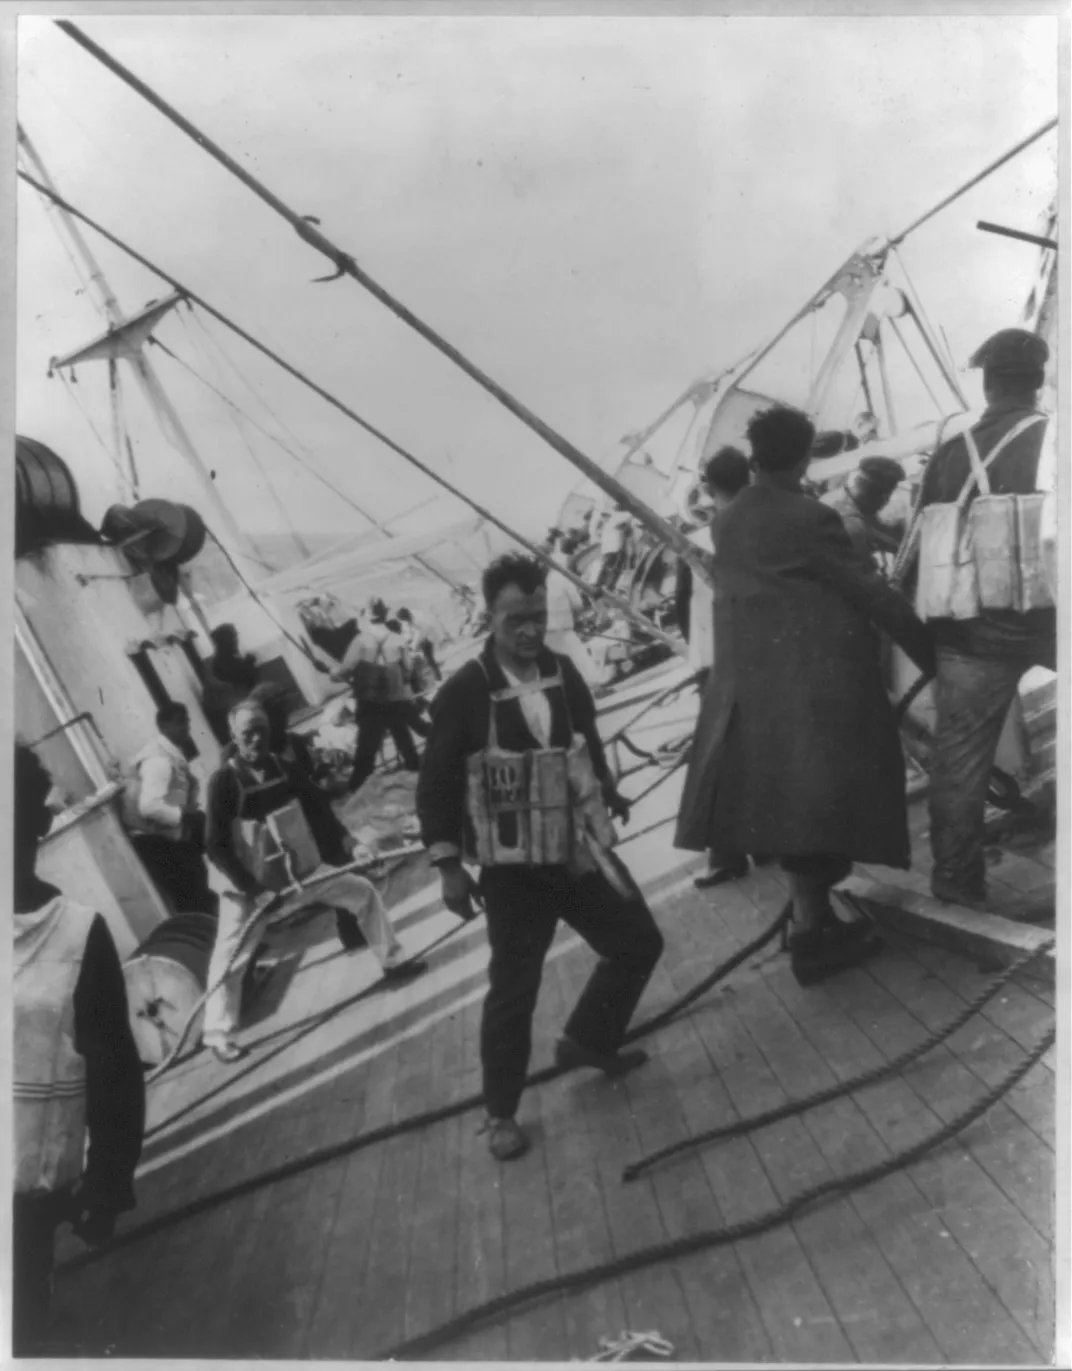 The crew and passengers of the Vestris try to lower lifeboats from the port side of the ship on November 12, 1928.